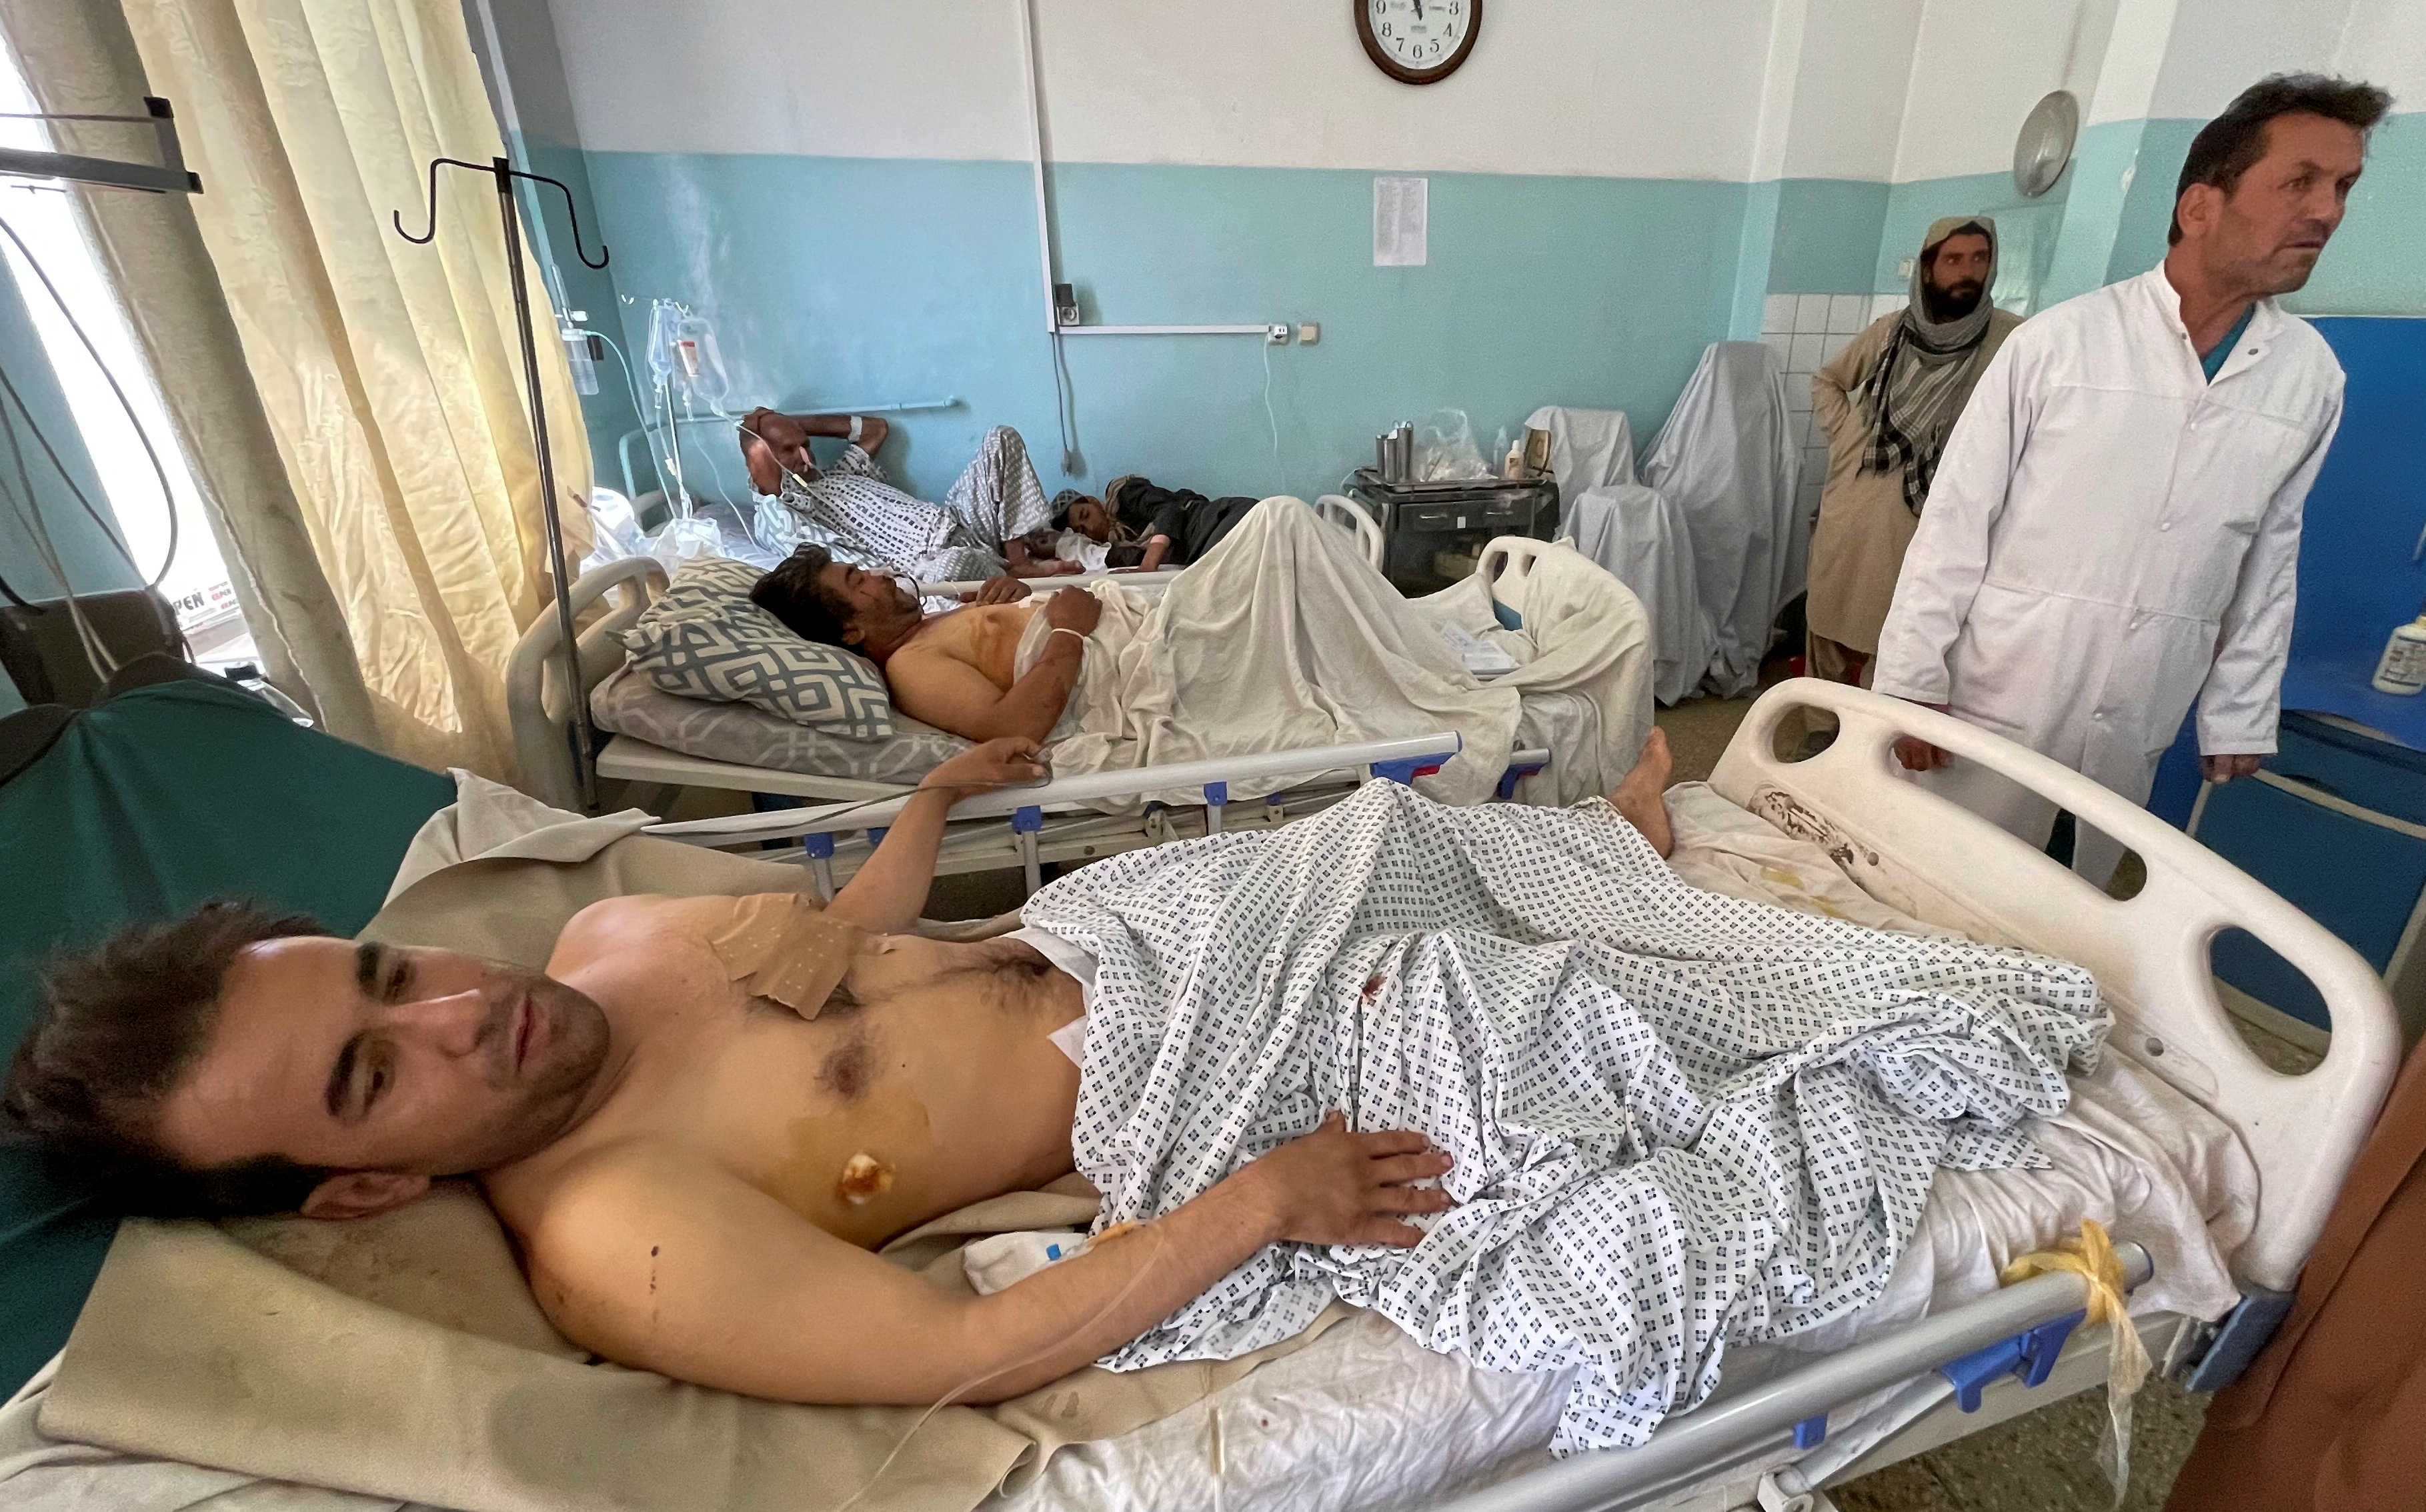 Wounded Afghan men receive treatment at a hospital after yesterday's explosions outside airport in Kabul